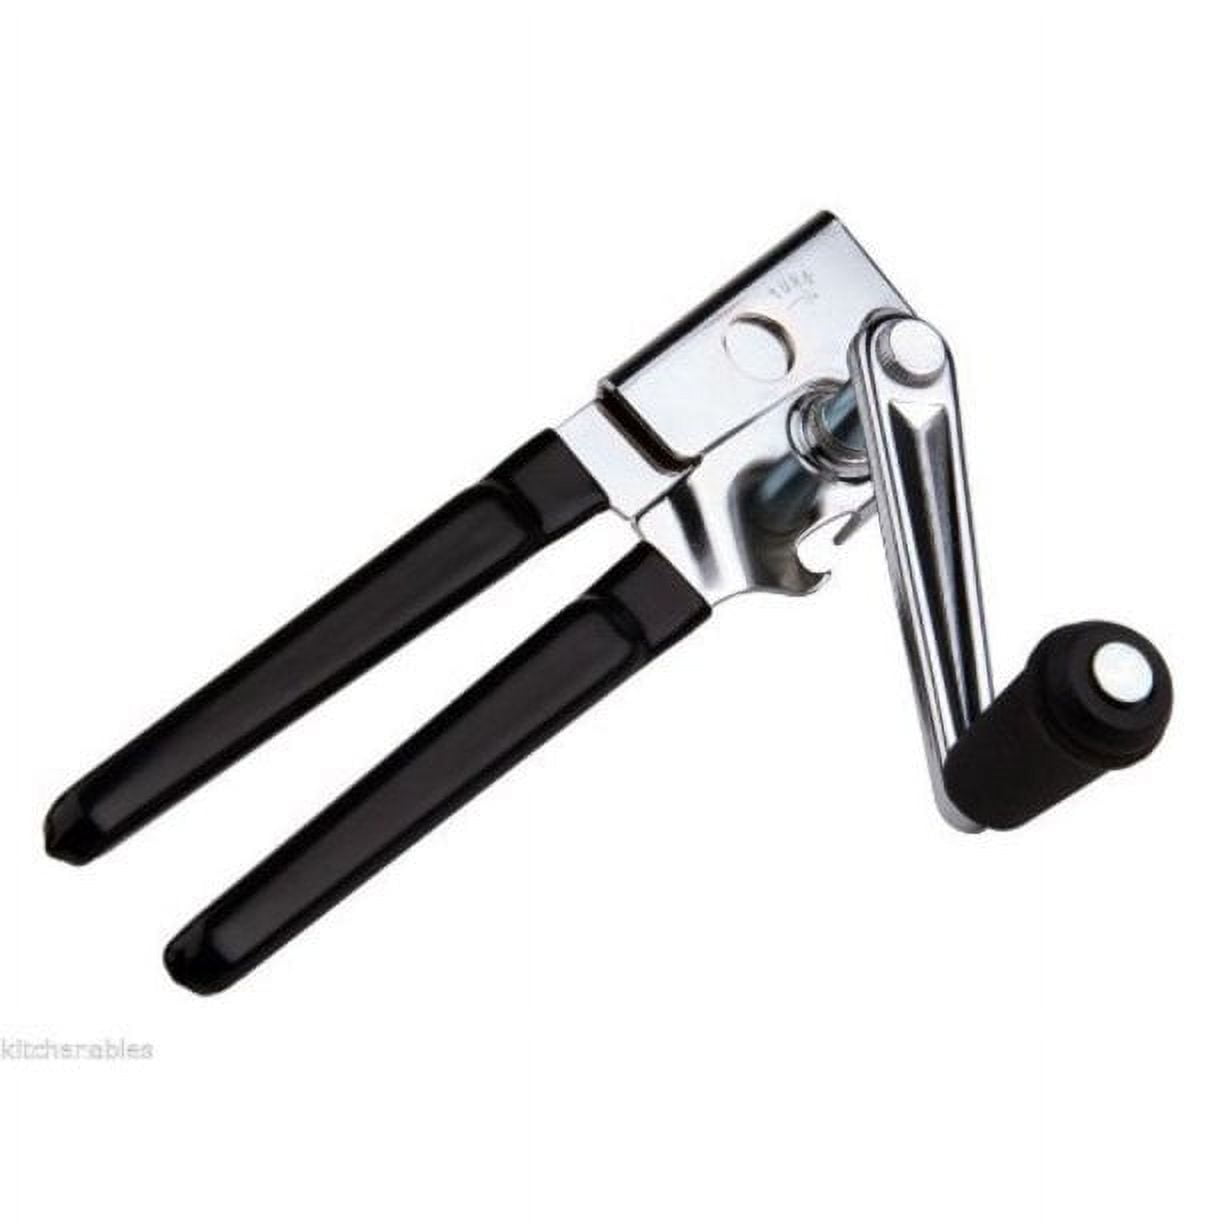 Sleekitch Commercial Can Opener Manual Heavy Duty, Hand Crank Can Opener, Large Handheld Can Opener Easy for Big Cans, Swing Grip Design, Manual Can